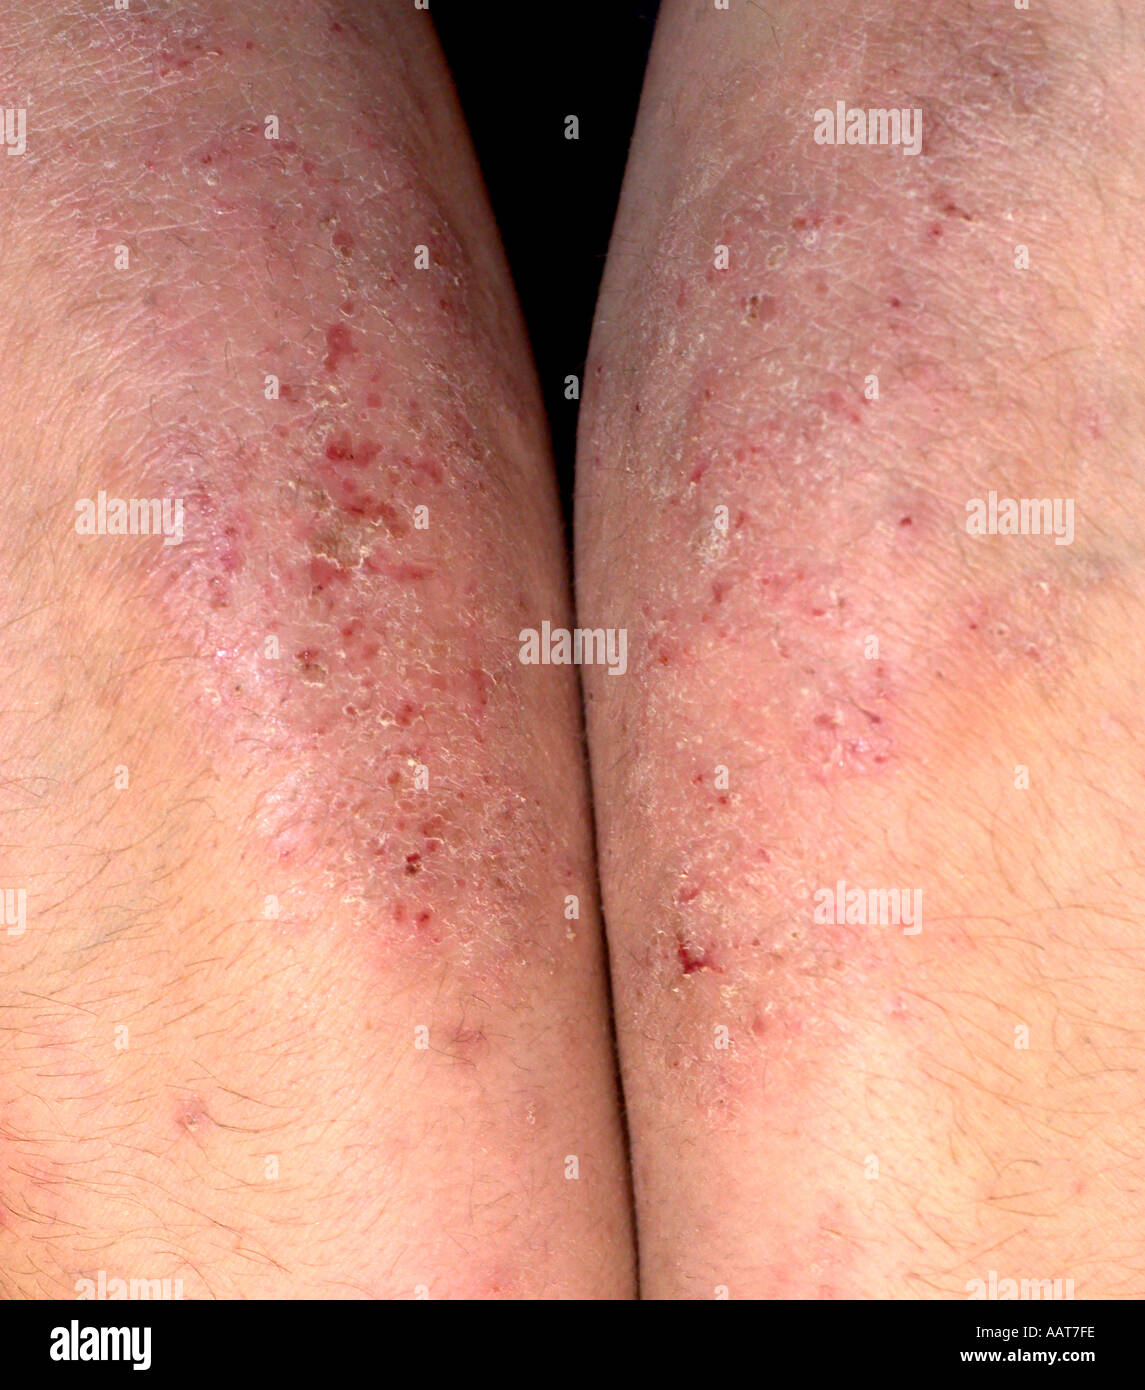 Skin rash of eczema on the forearms extensor surface of a 35 year old woman Stock Photo